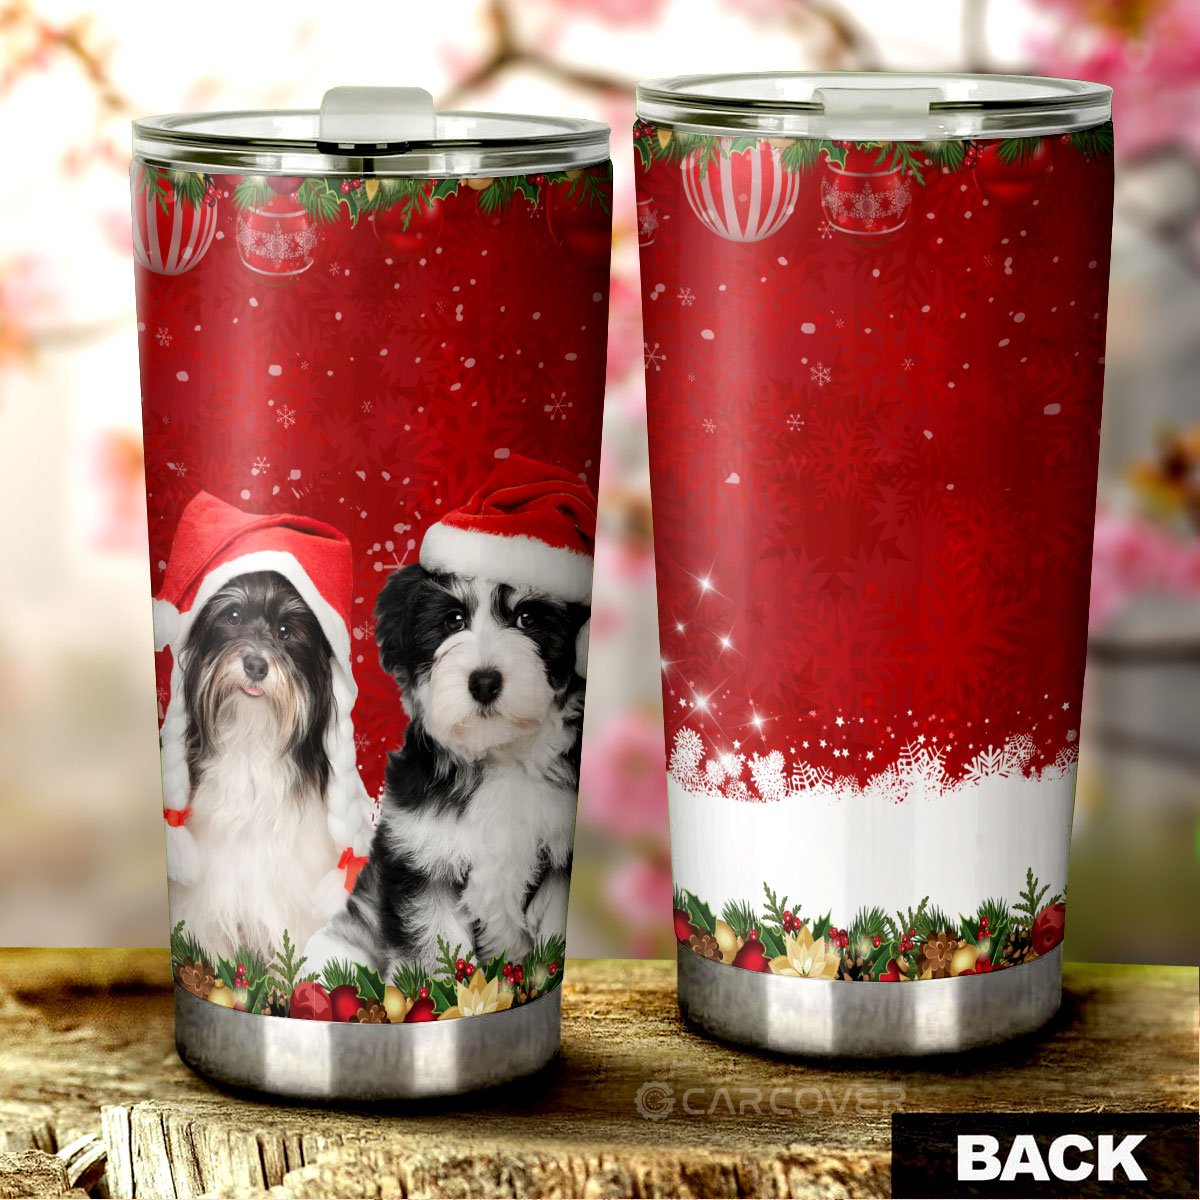 Shih Tzu Christmas Tumbler Cup Custom Car Accessories For Dog Lovers - Gearcarcover - 4